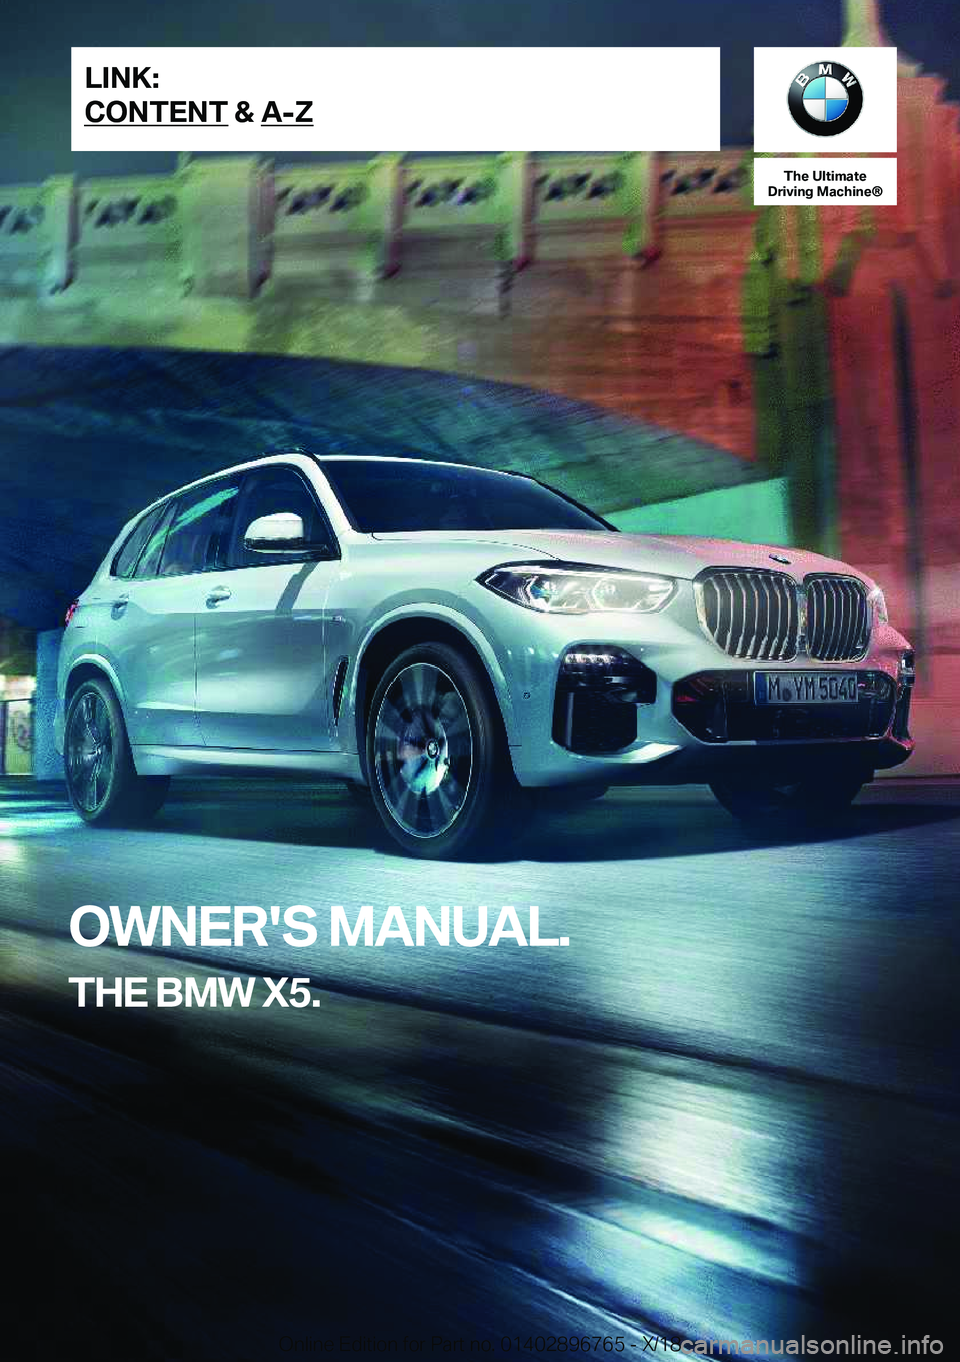 BMW X5 2019  Owners Manual �T�h�e��U�l�t�i�m�a�t�e
�D�r�i�v�i�n�g��M�a�c�h�i�n�e�n
�O�W�N�E�R�'�S��M�A�N�U�A�L�.
�T�H�E��B�M�W��X�5�.�L�I�N�K�:
�C�O�N�T�E�N�T��&��A�-�Z�O�n�l�i�n�e��E�d�i�t�i�o�n��f�o�r��P�a�r�t�